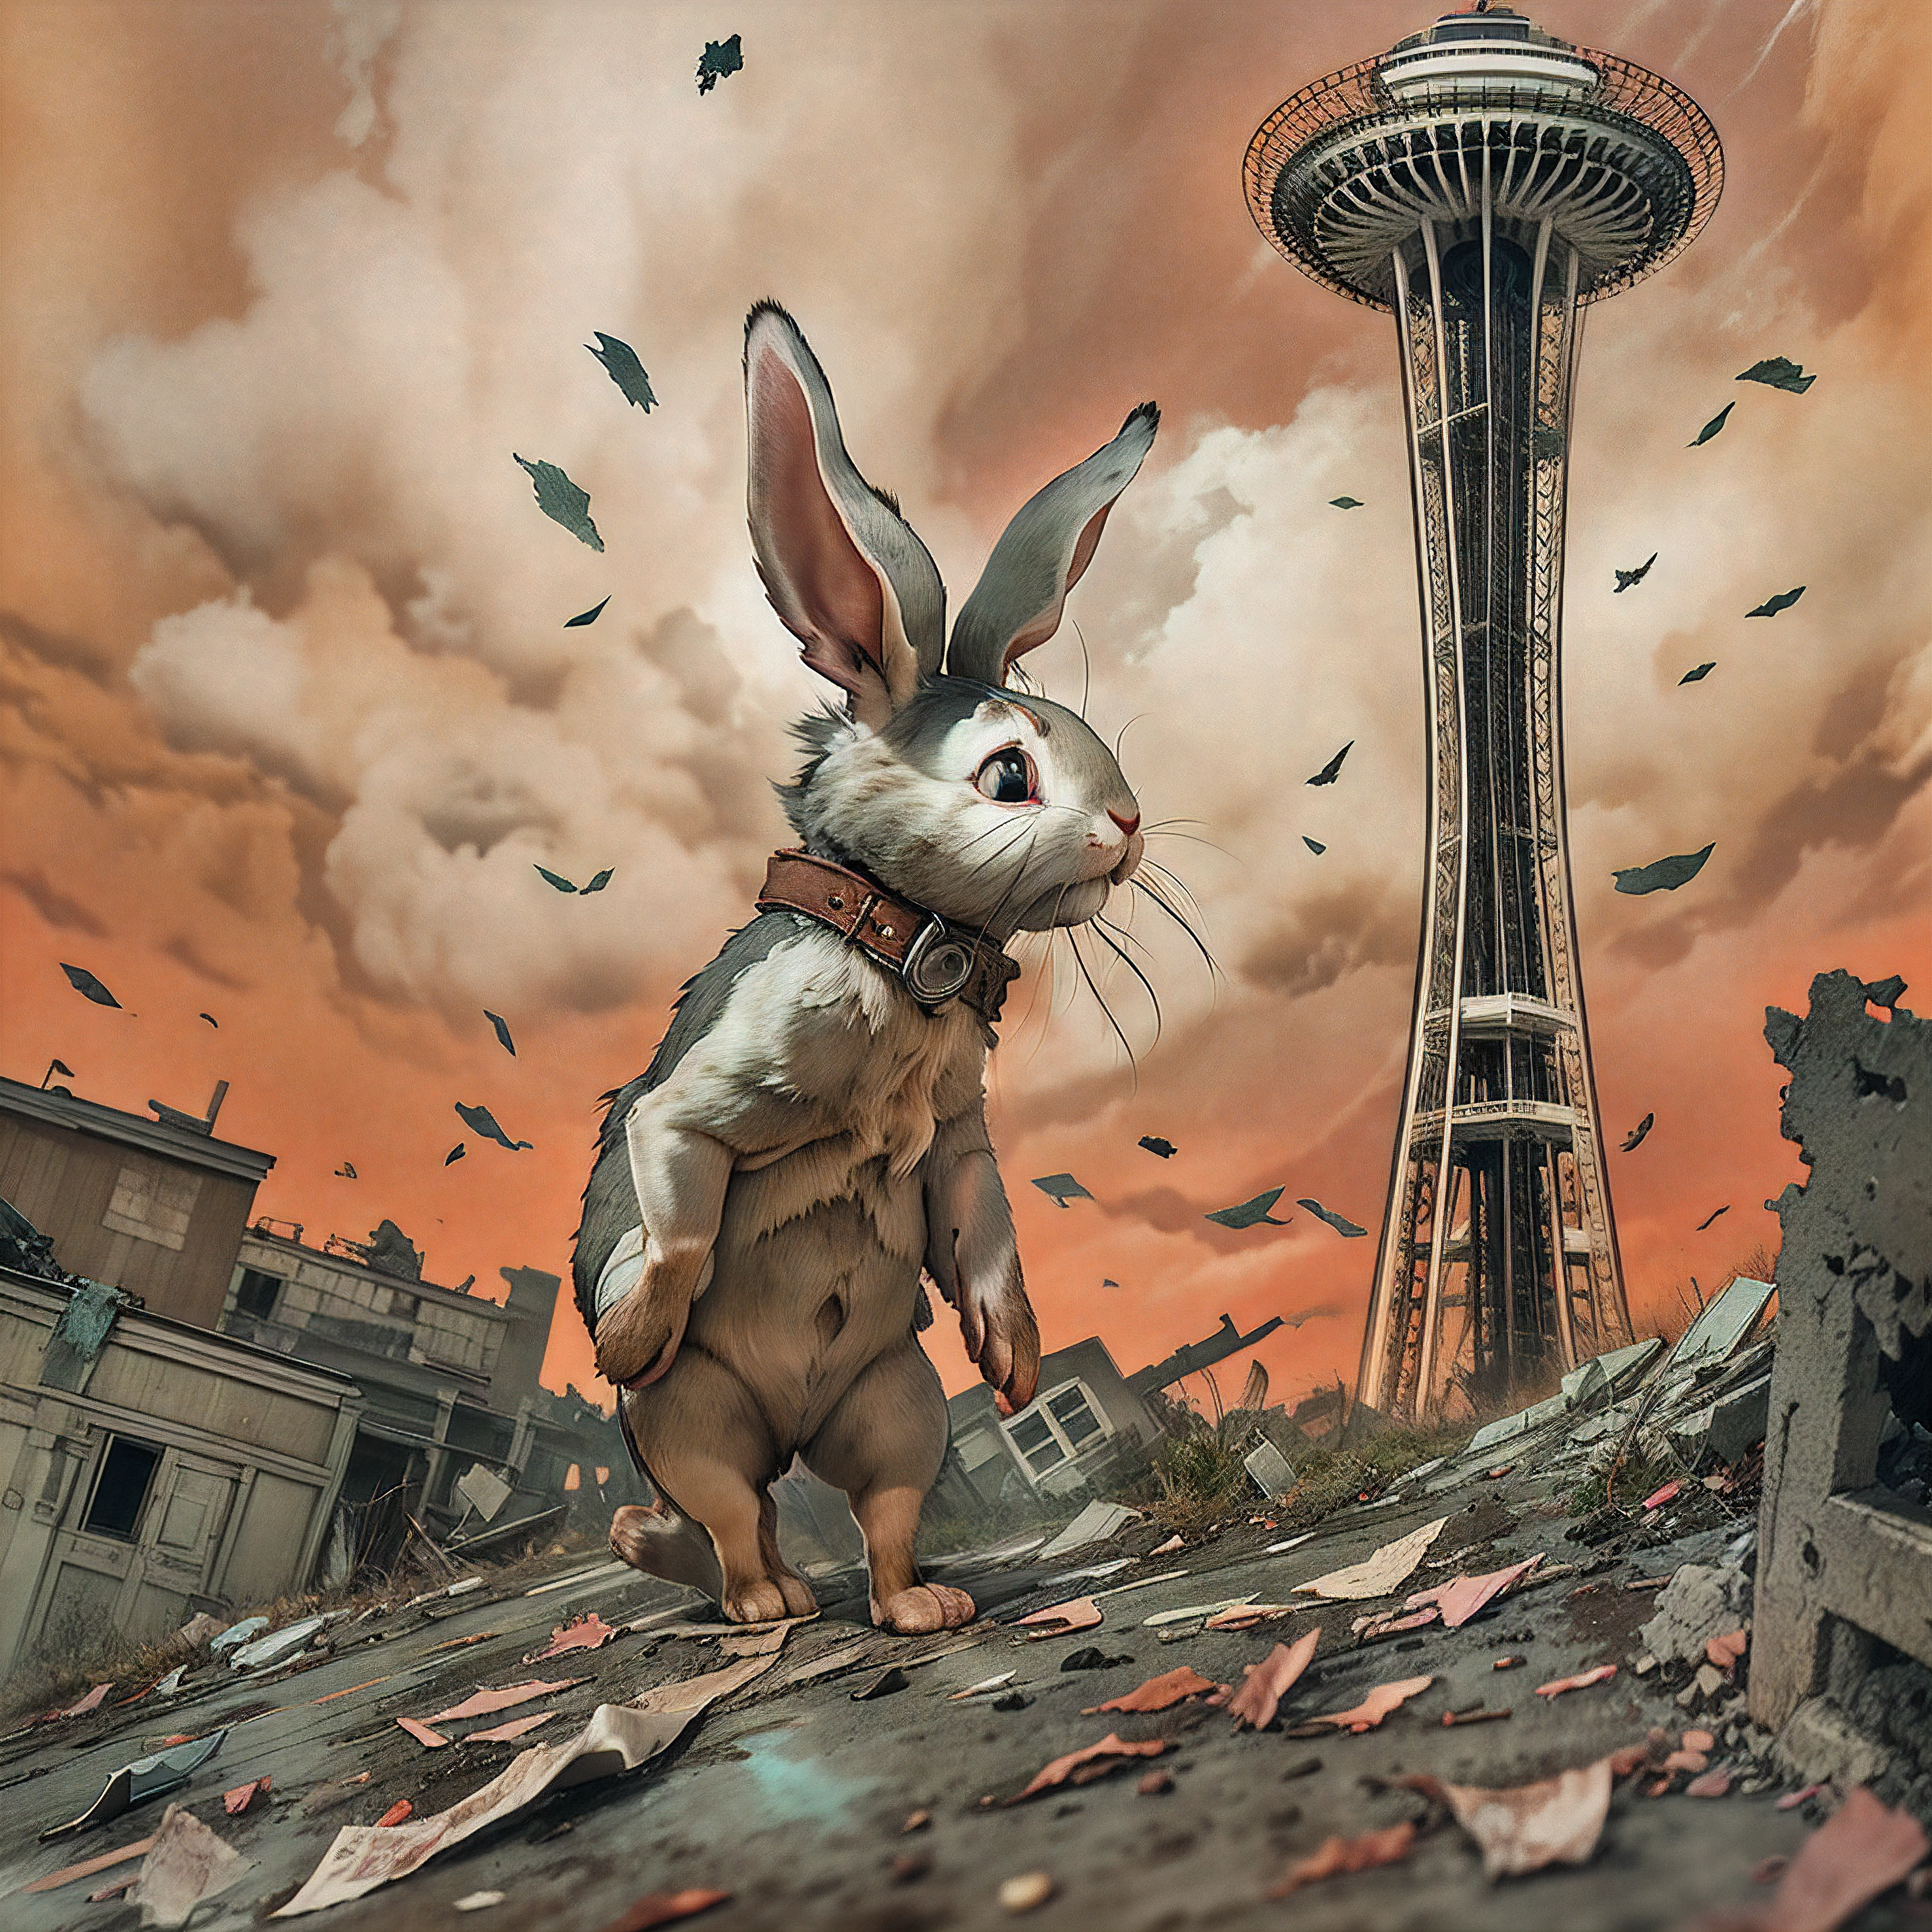 Against a dark red sky filled with black clouds, a tattered stuffed rabbit with one button eye missing floats over the crumbling remains of the Space Needle in Seattle. The rabbit's head lolls open loosely in a silent scream as its limp arm drags through the air.

"Nooo..." the rabbit moans weakly, leaving a trail of wavering motion lines behind it as it drifts through the sky. The once towering Space Needle now stands broken below, bent and corroded from years of neglect.

In the next panel, the ragged rabbit is in freefall, its head still open in a soundless shriek. Frayed motion lines surround its body as it plunges down the side of the structure. The rabbit's remaining button eye is wide with resignation.

The final panel shows the stuffed rabbit hitting the cracked asphalt with a quiet thud at the feet of a man in tattered clothes and a gas mask. The man barely glances down as the toy hits the ground. In the distance, the ruins of Seattle smolder under the ominous sky. The only sound is the  wind.